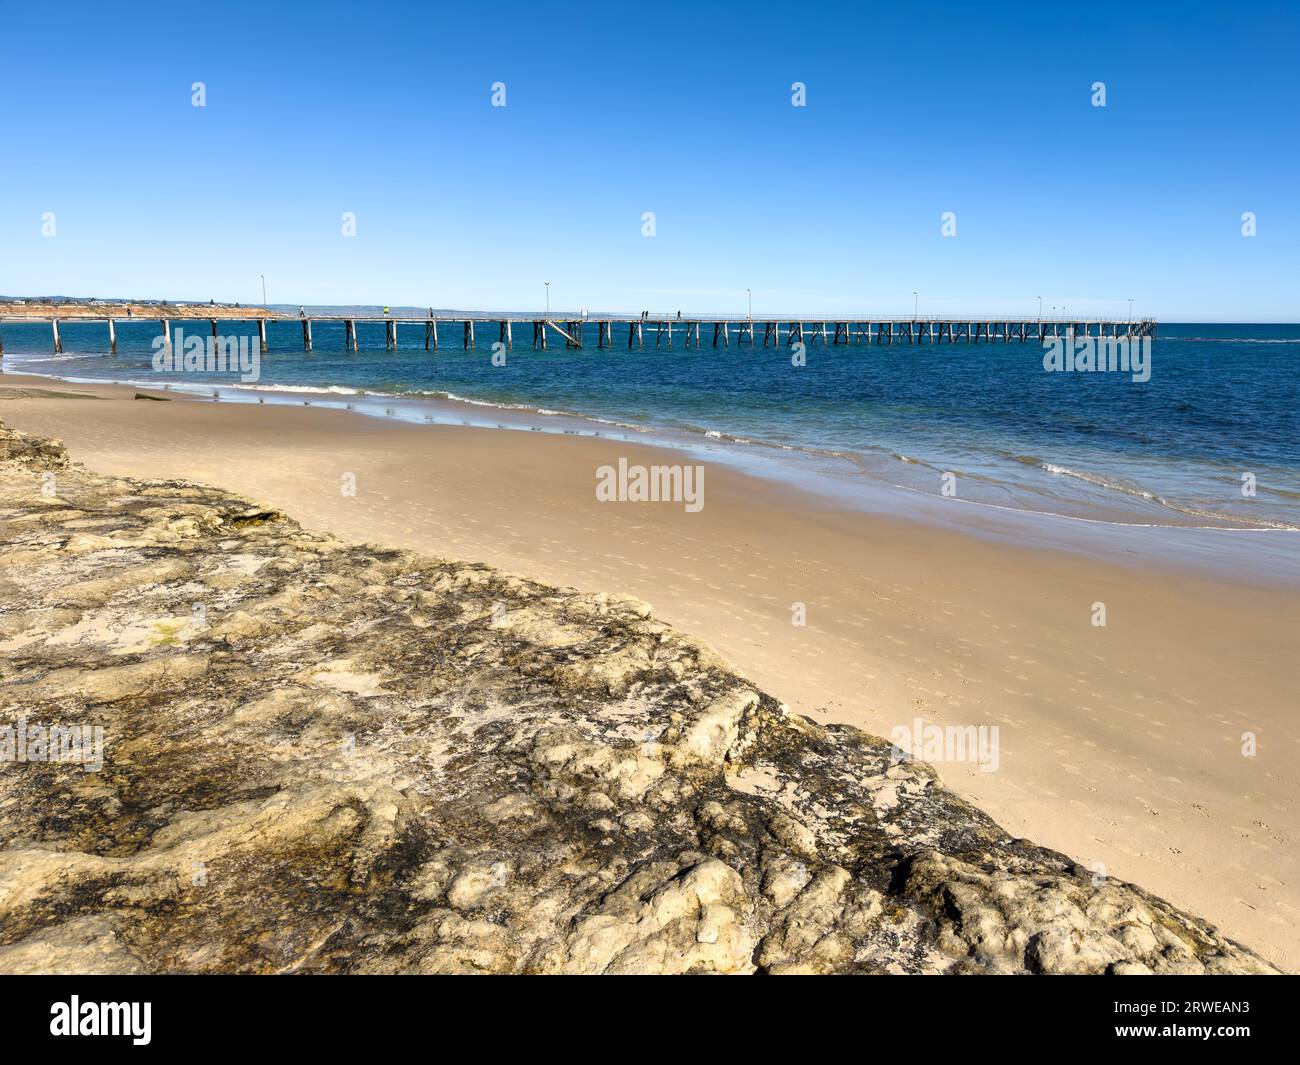 Beautiful Port Noarlunga Beach with wooden jetty in Adelaide, South Australia. Stock Photo